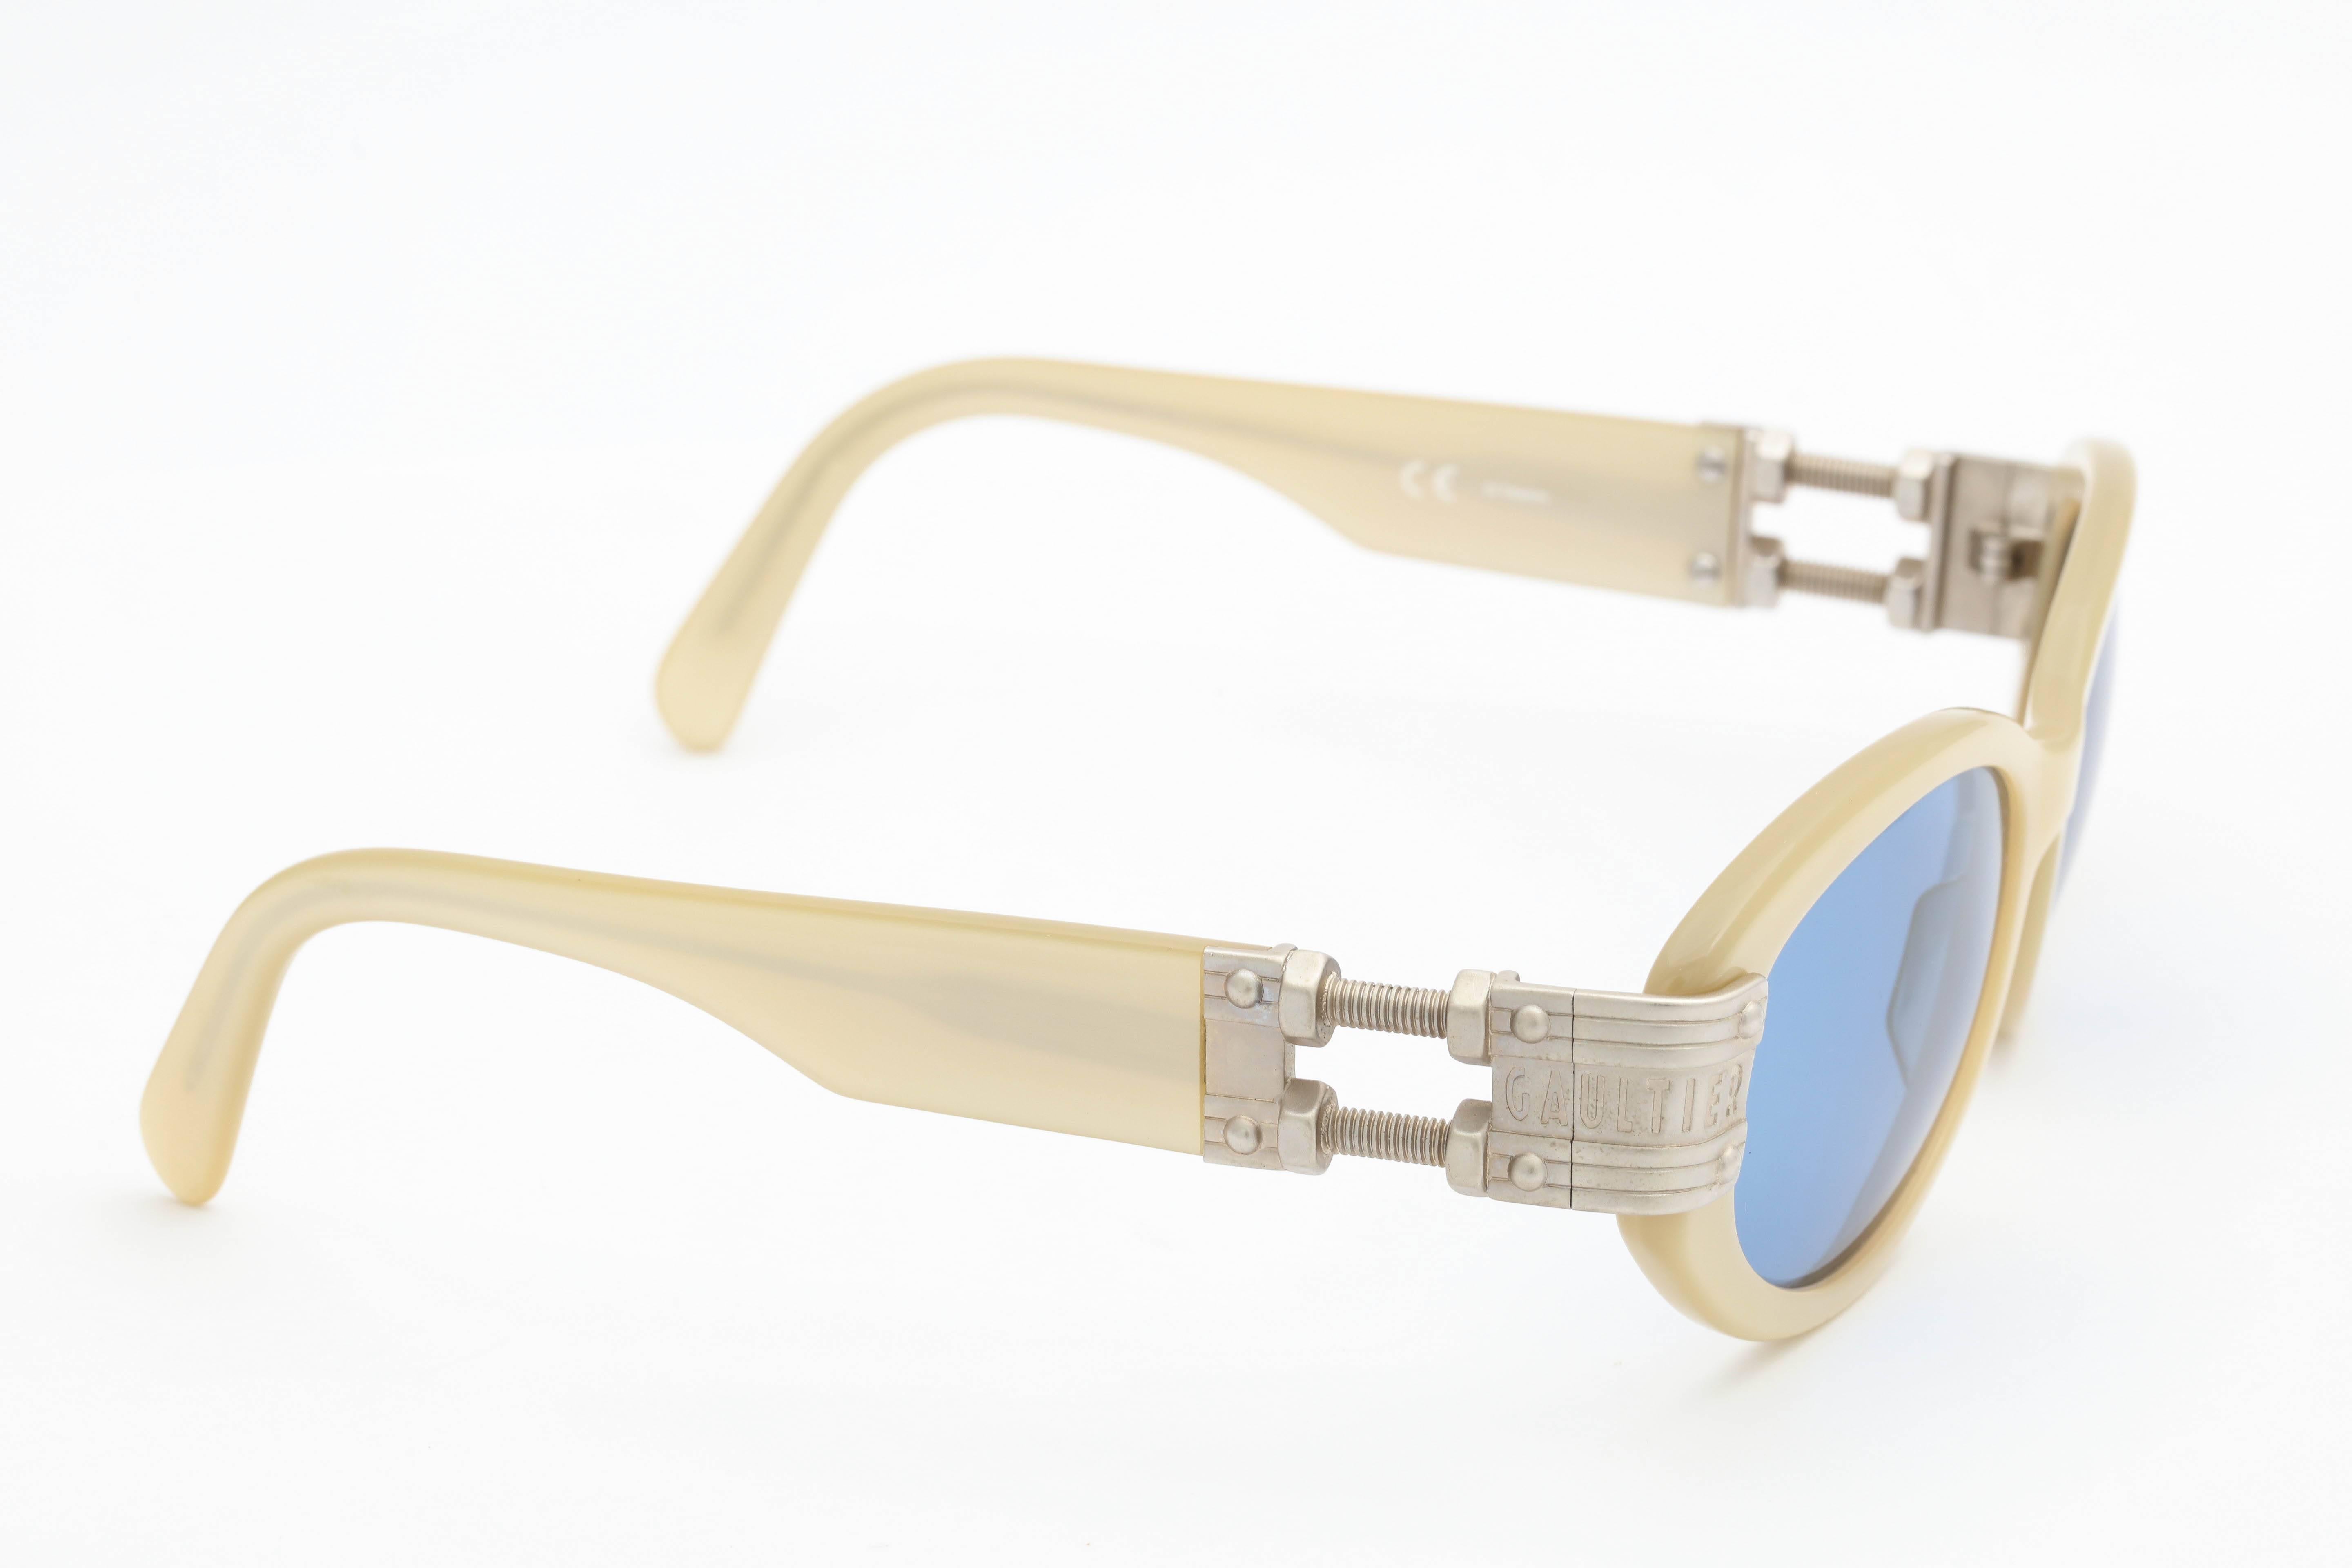 Jean Paul Gaultier Vintage 56-5204 Sunglasses In Excellent Condition For Sale In Chicago, IL